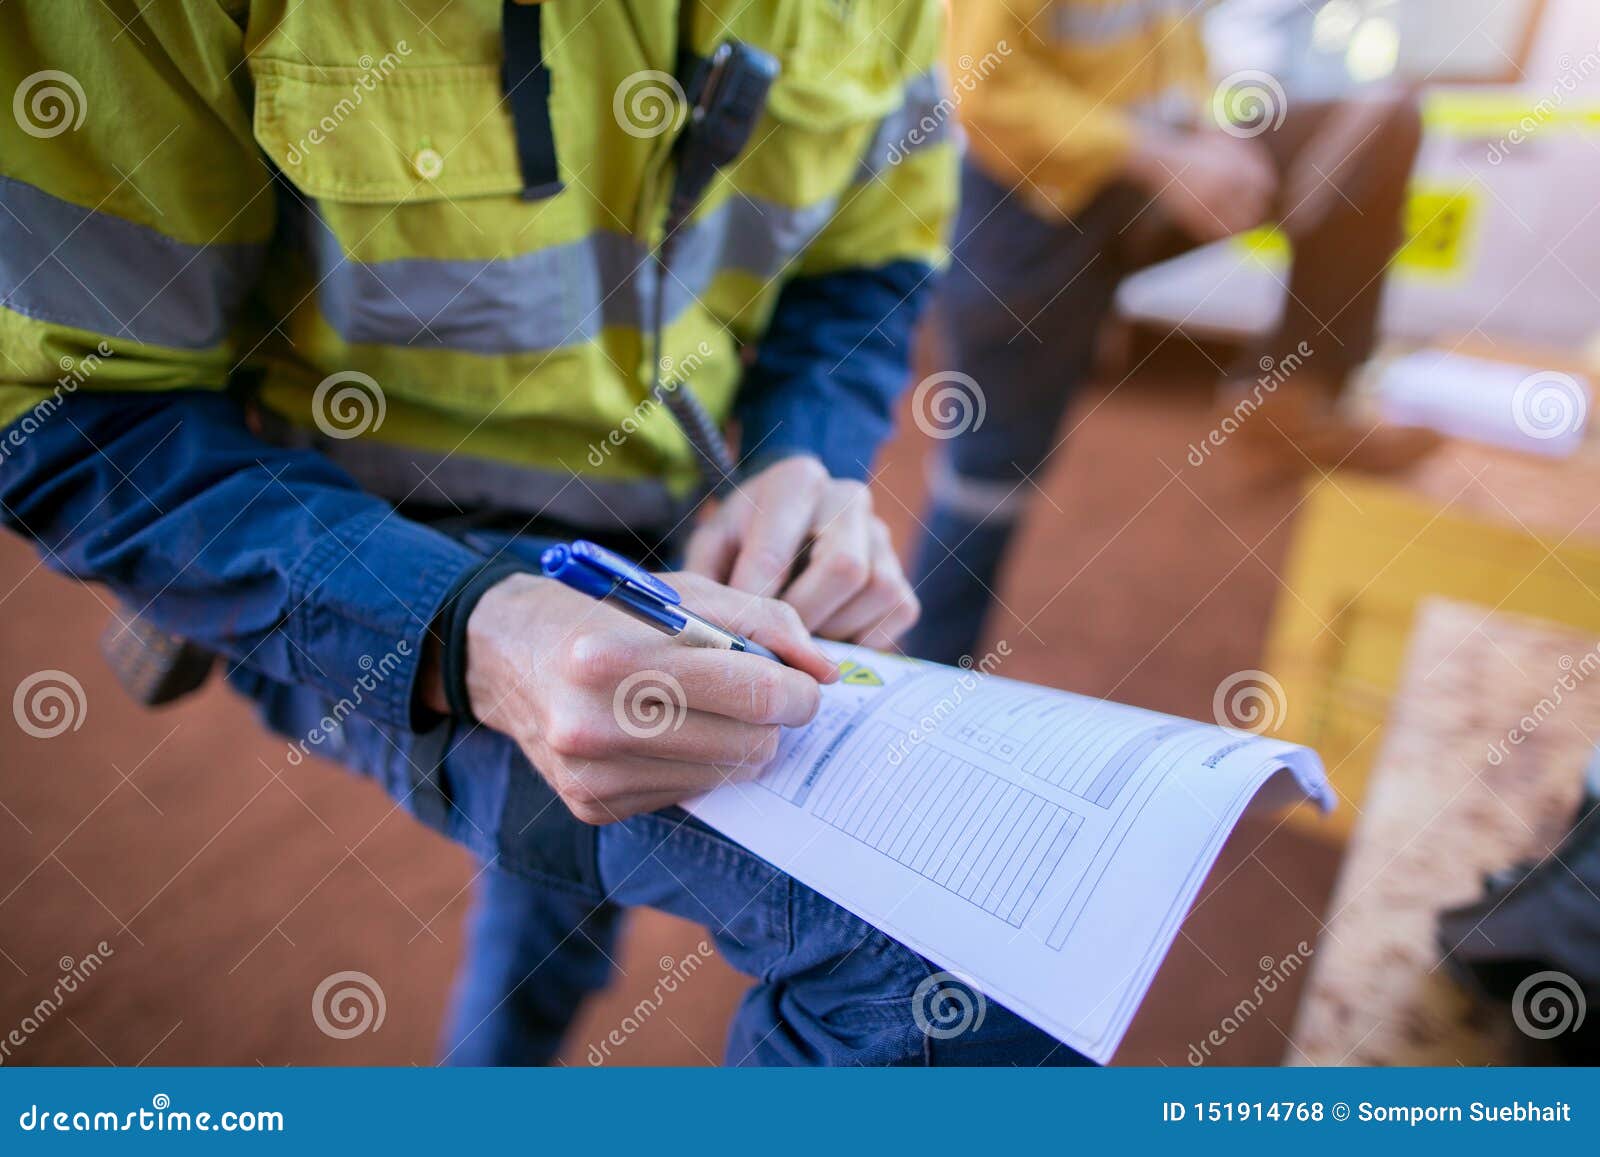 construction coal miner supervisor conducting safety checking on job hazards analysis on hot work permit before sign off